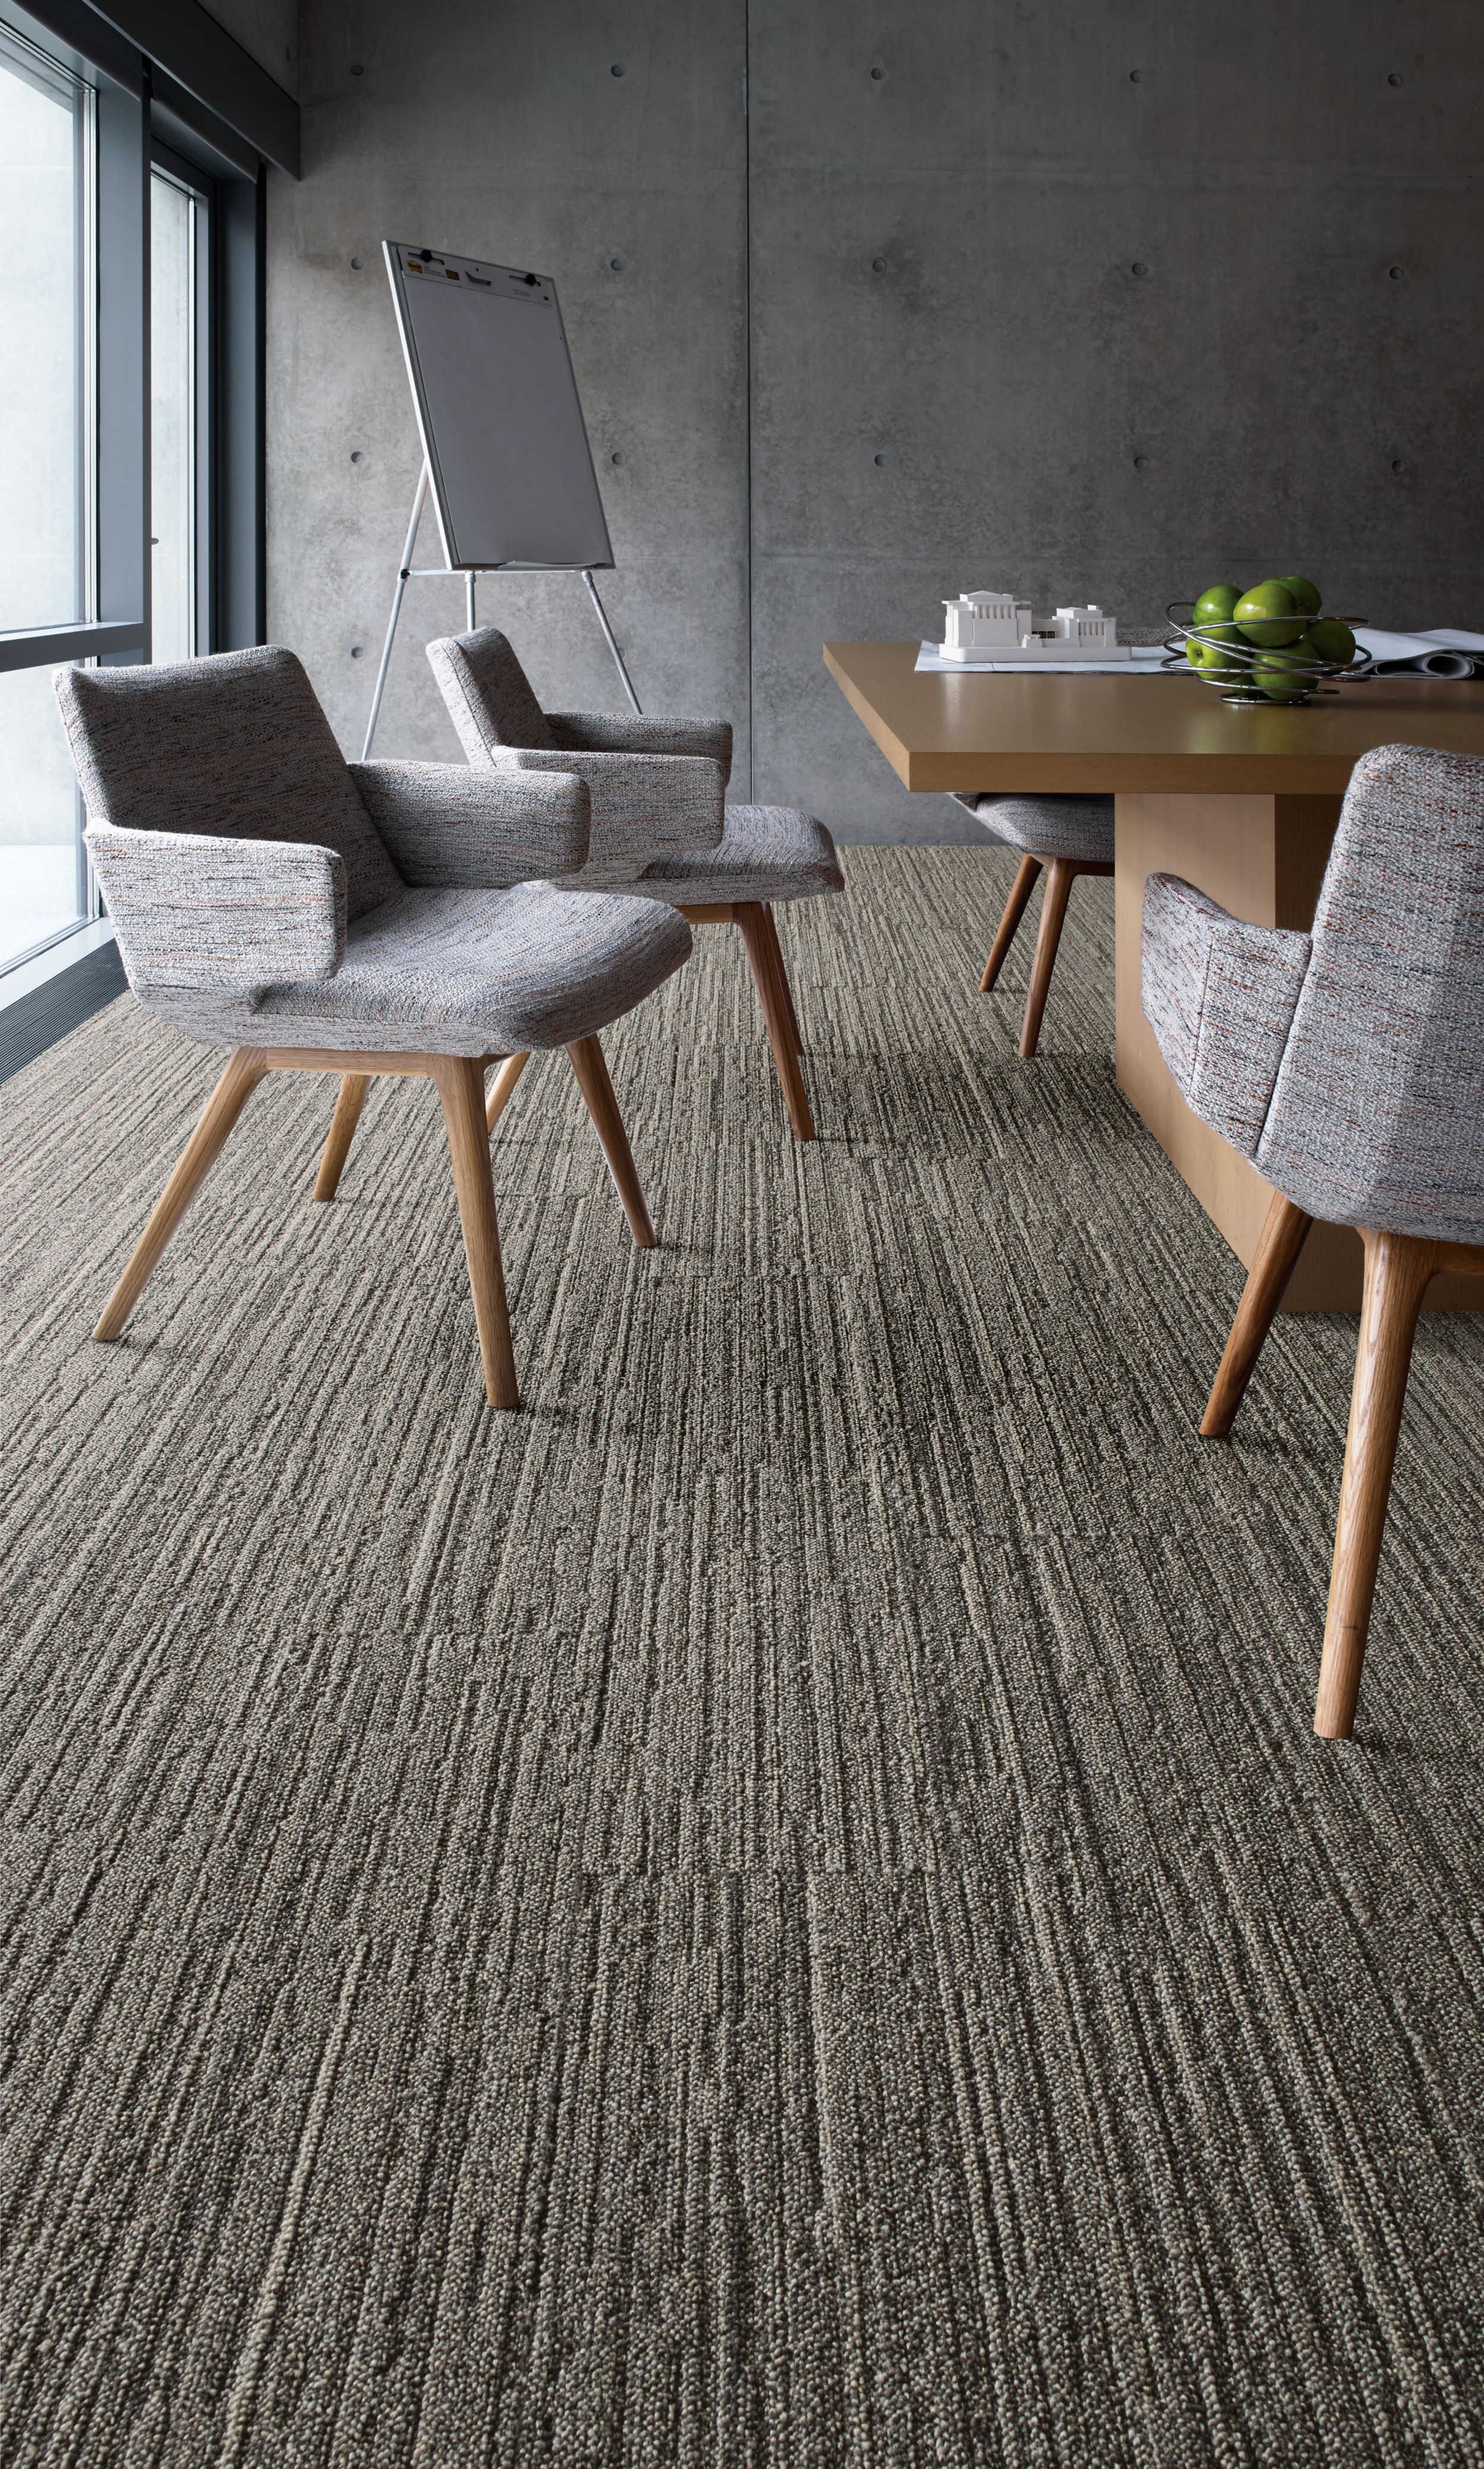 image Interface WW880 plank carpet tile in meeting room with table and chairs numéro 1